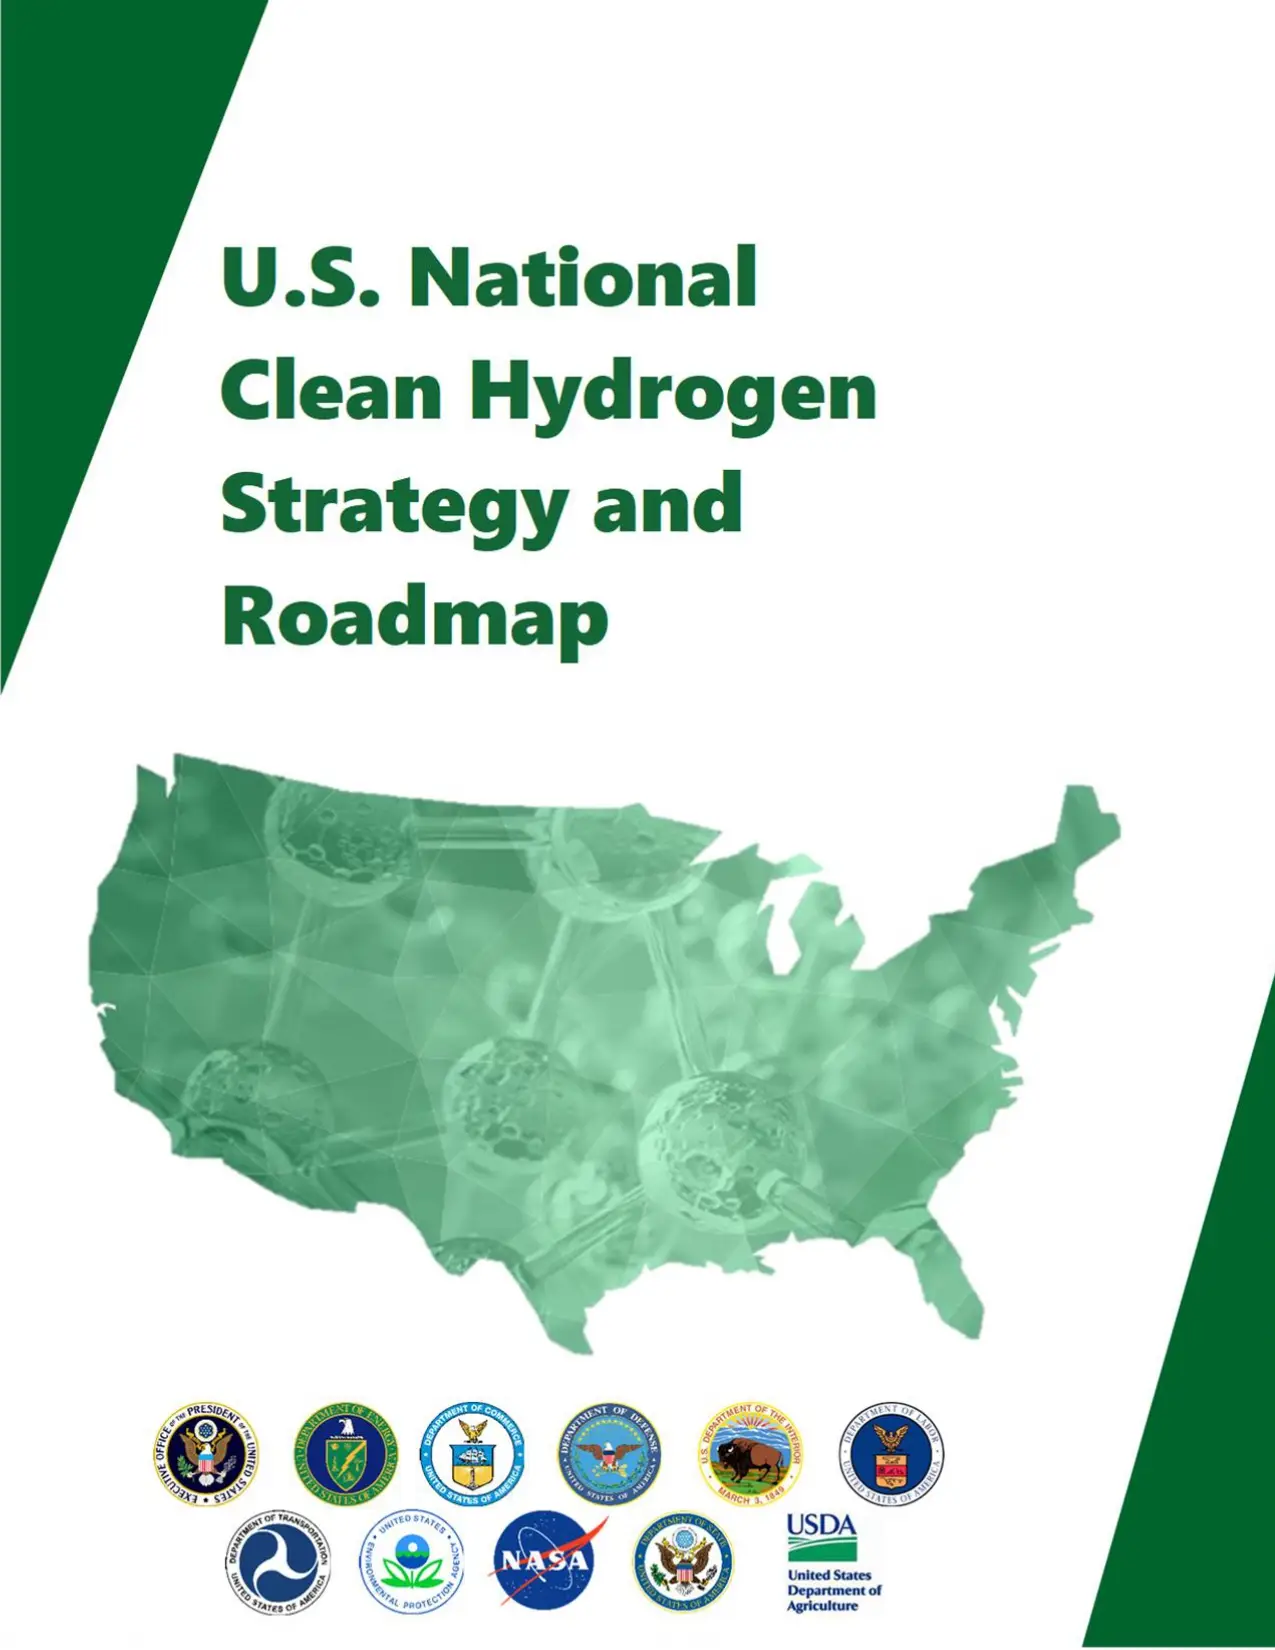 U.S National Clean Hydrogen Strategy and Roadmap